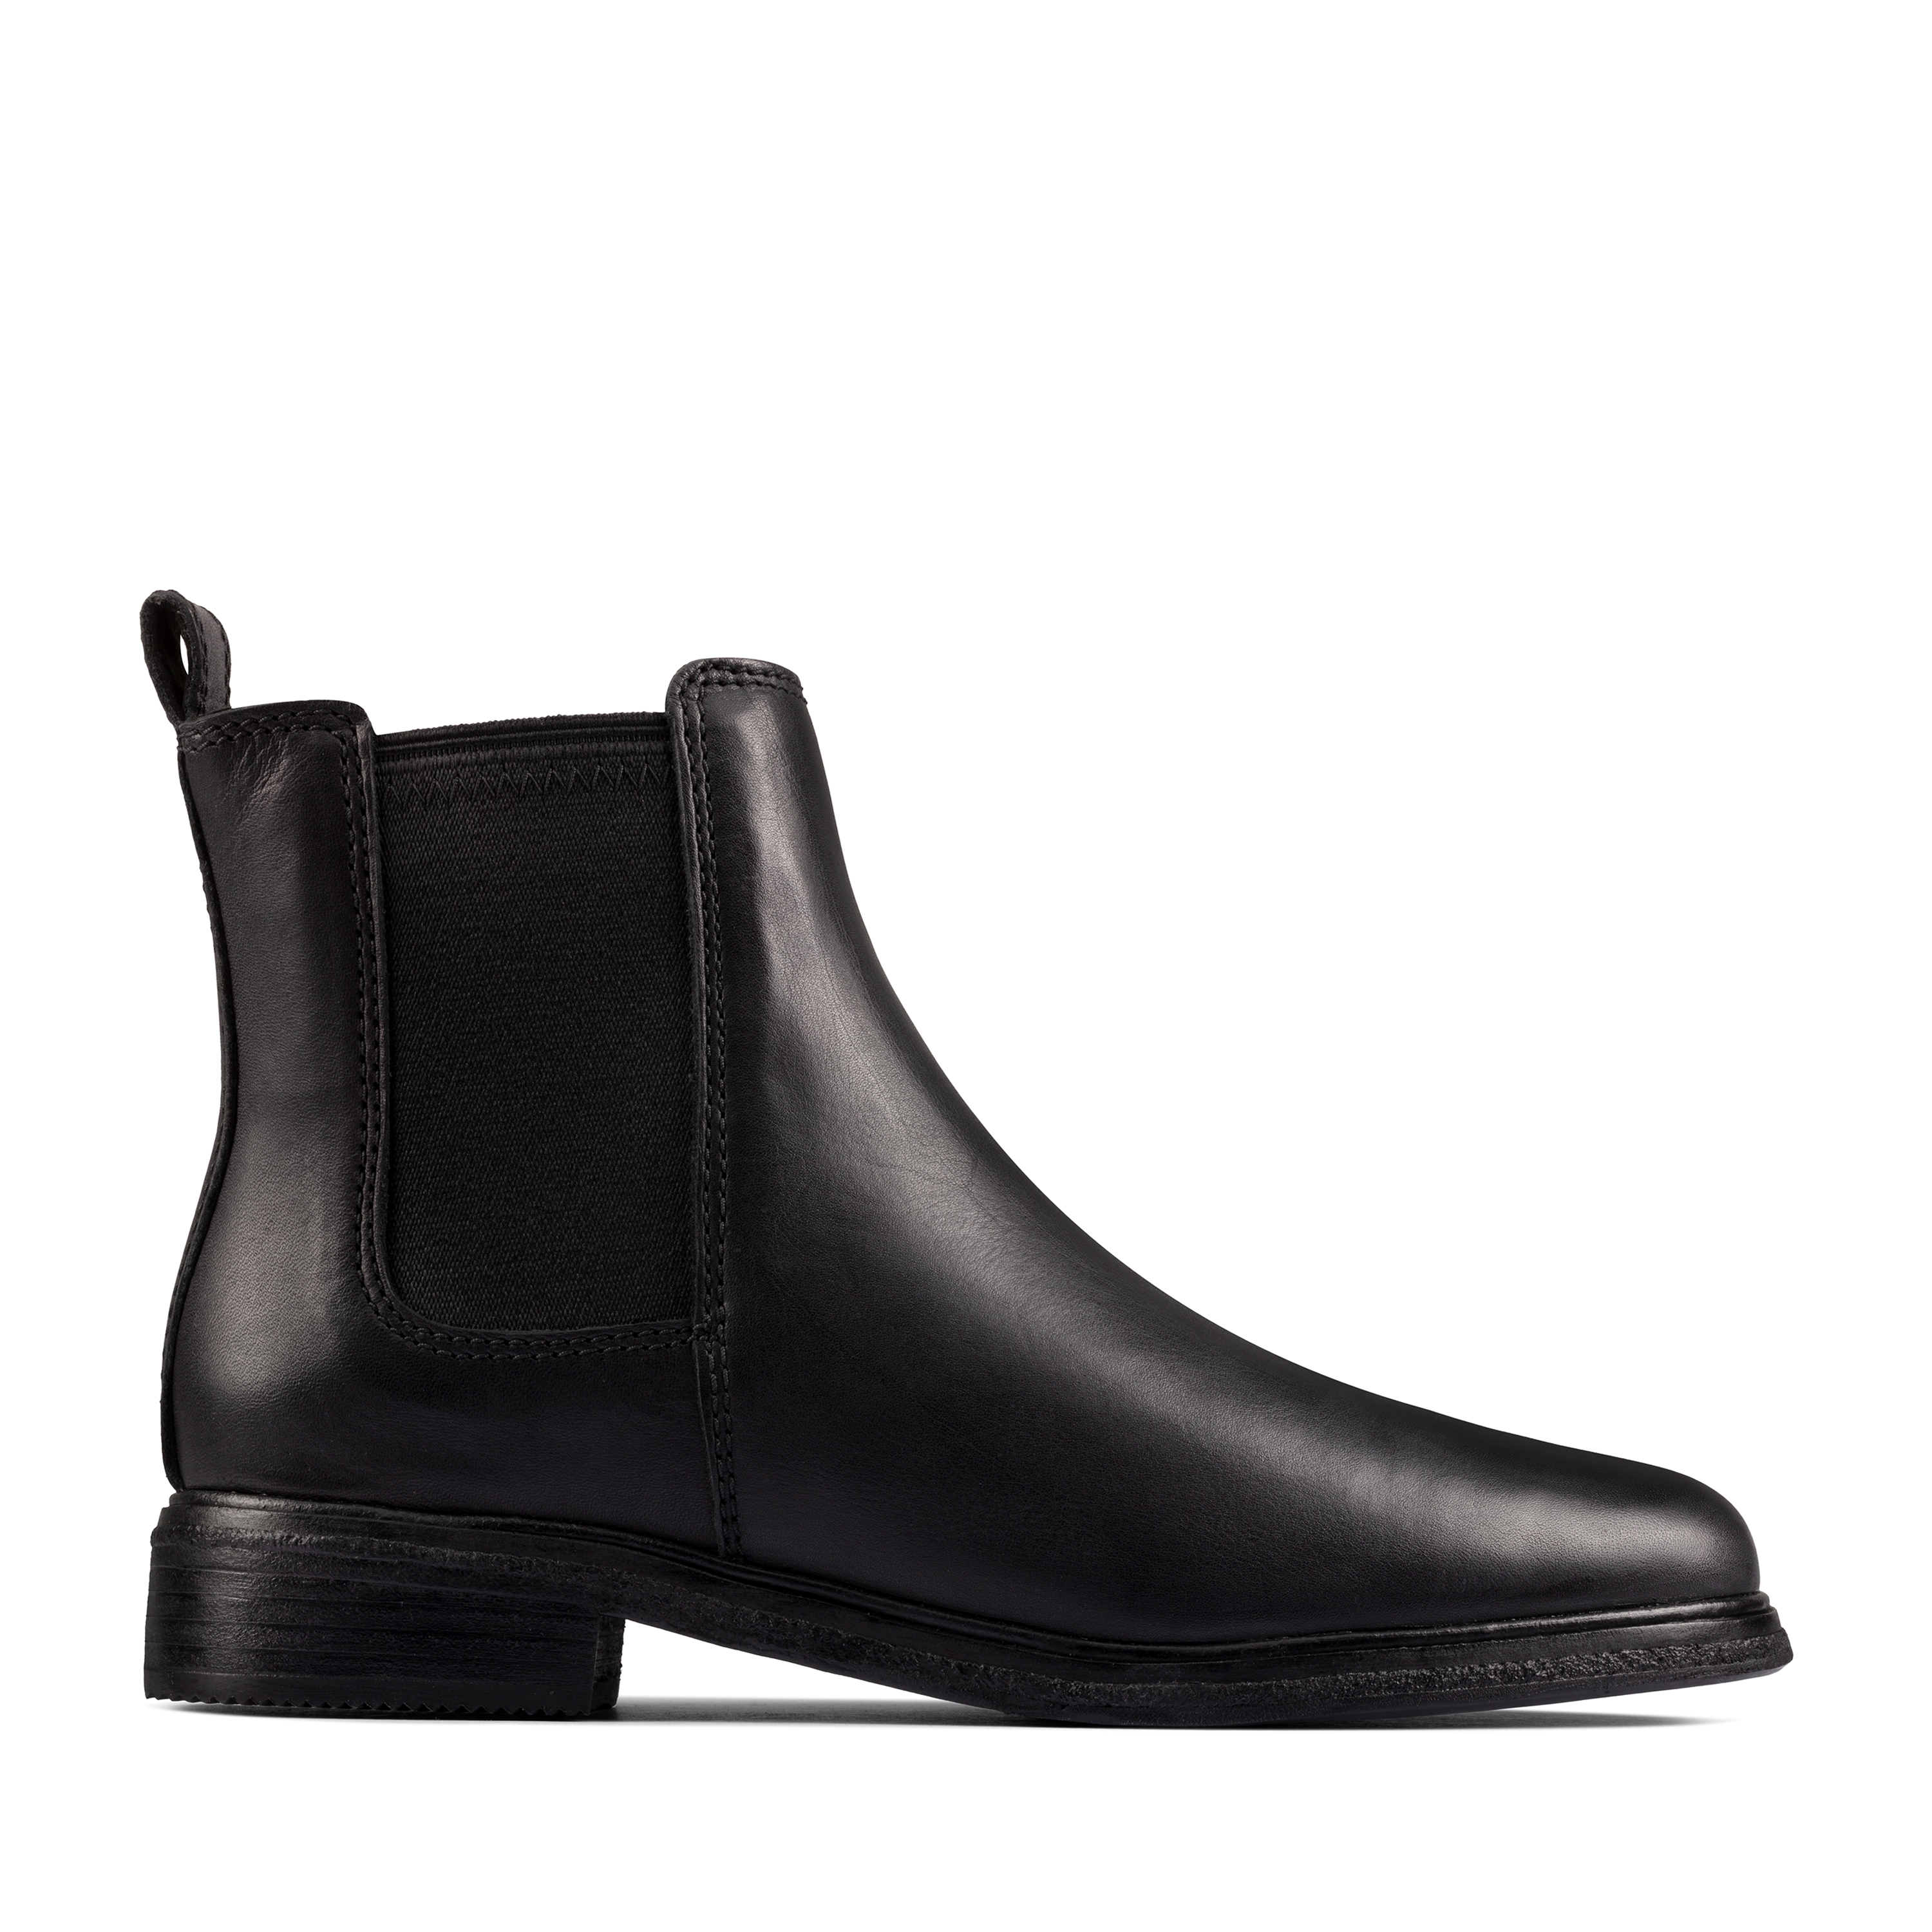 Clarks | Clarkdale Arlo Black Ankle Boots